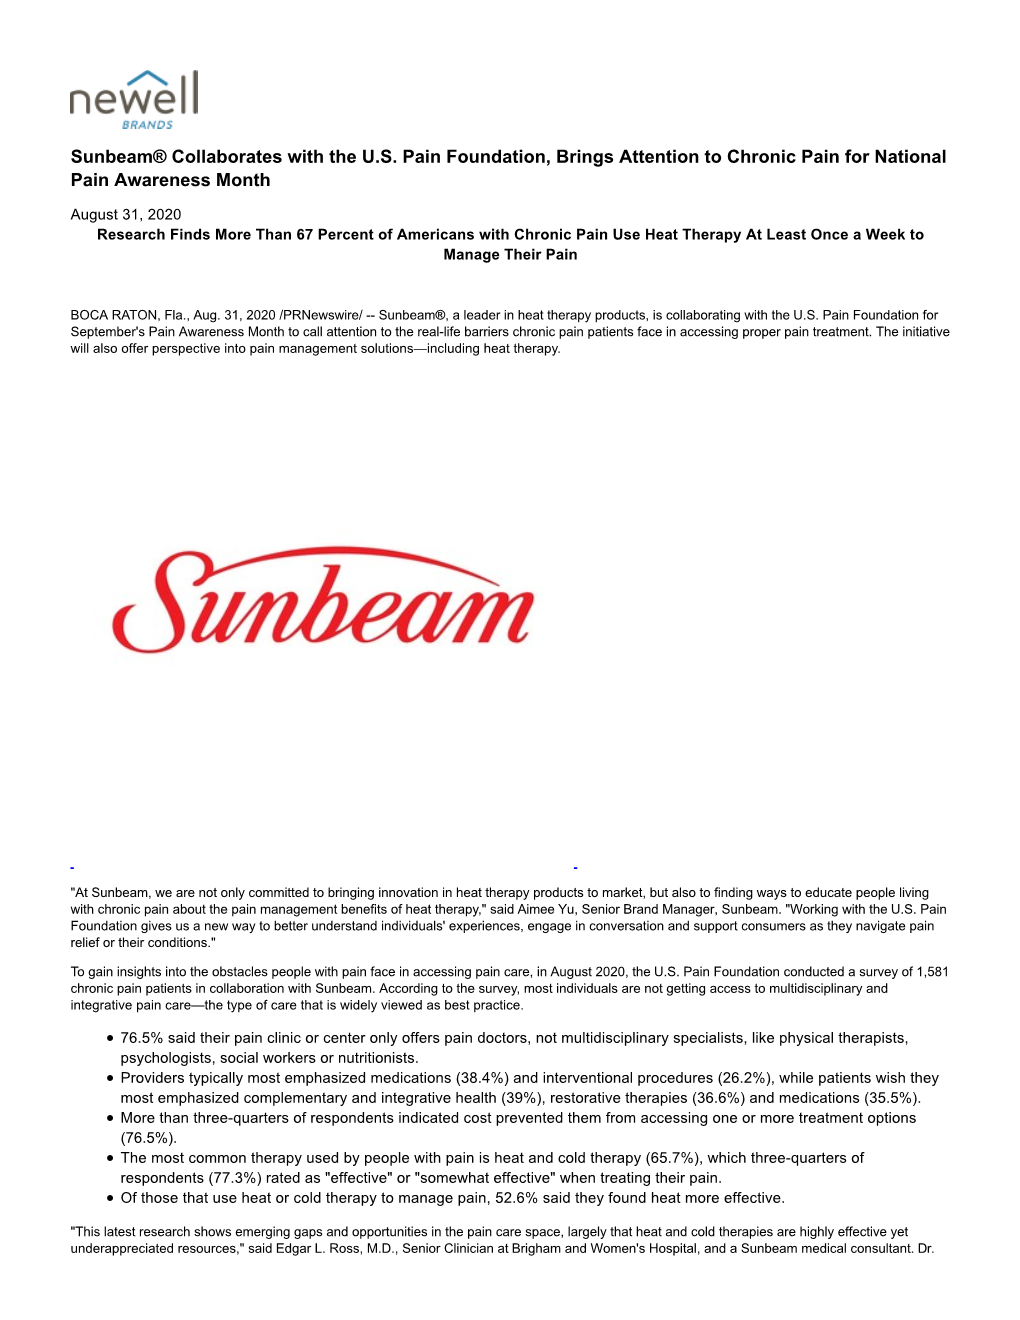 Sunbeam® Collaborates with the U.S. Pain Foundation, Brings Attention to Chronic Pain for National Pain Awareness Month